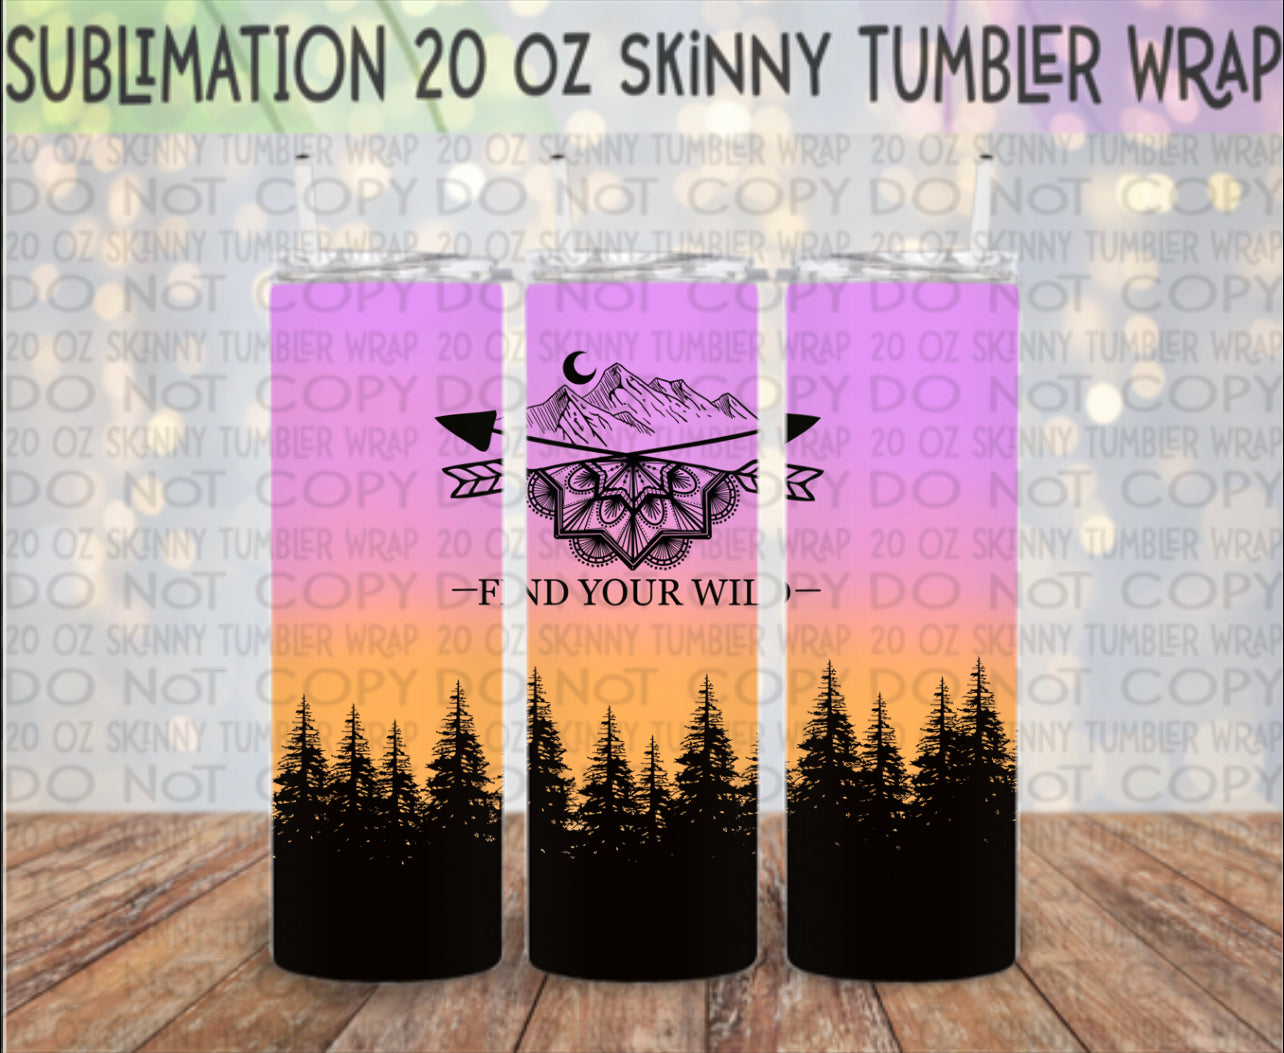 Find Your Wild 20 Oz Skinny Tumbler Wrap - Sublimation Transfer - RTS